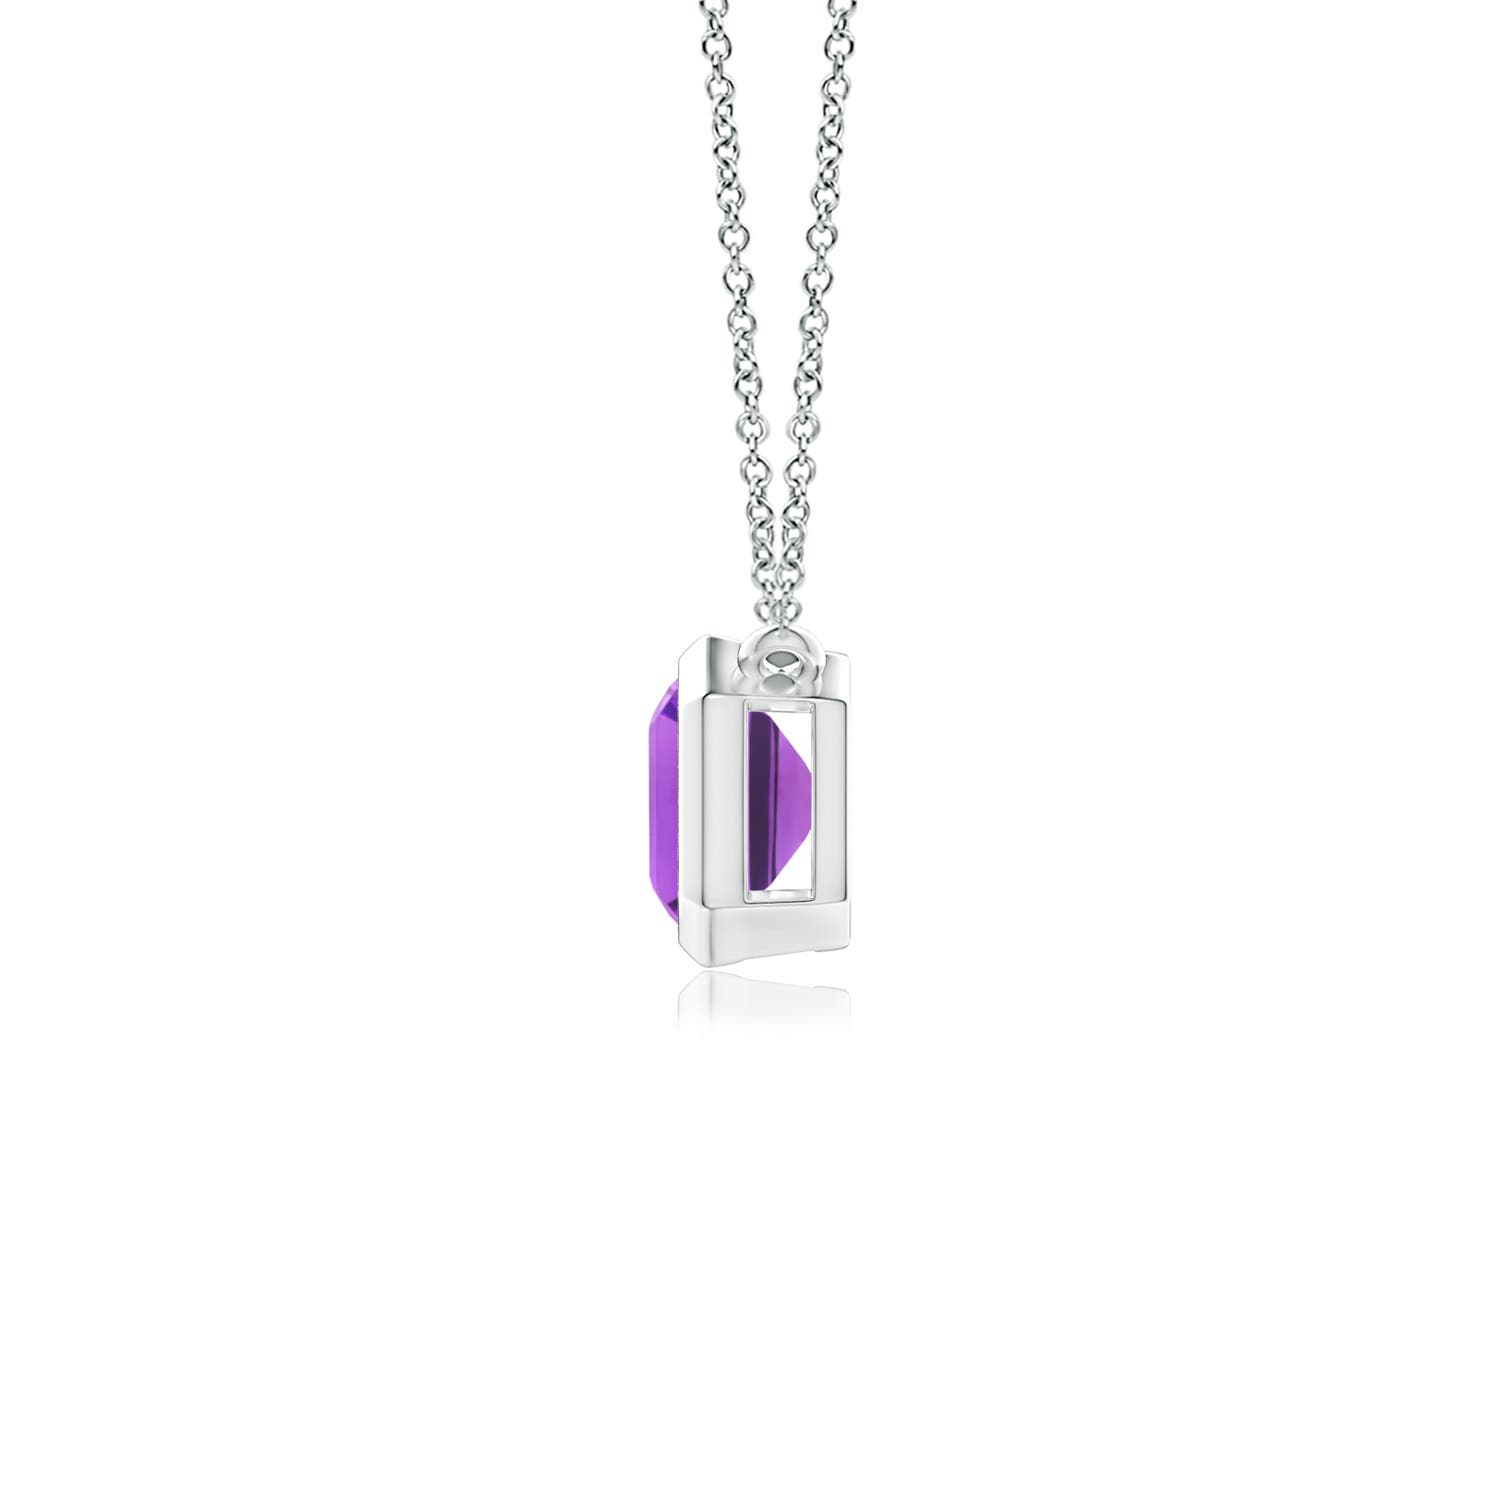 AAA - Amethyst / 0.9 CT / 14 KT White Gold